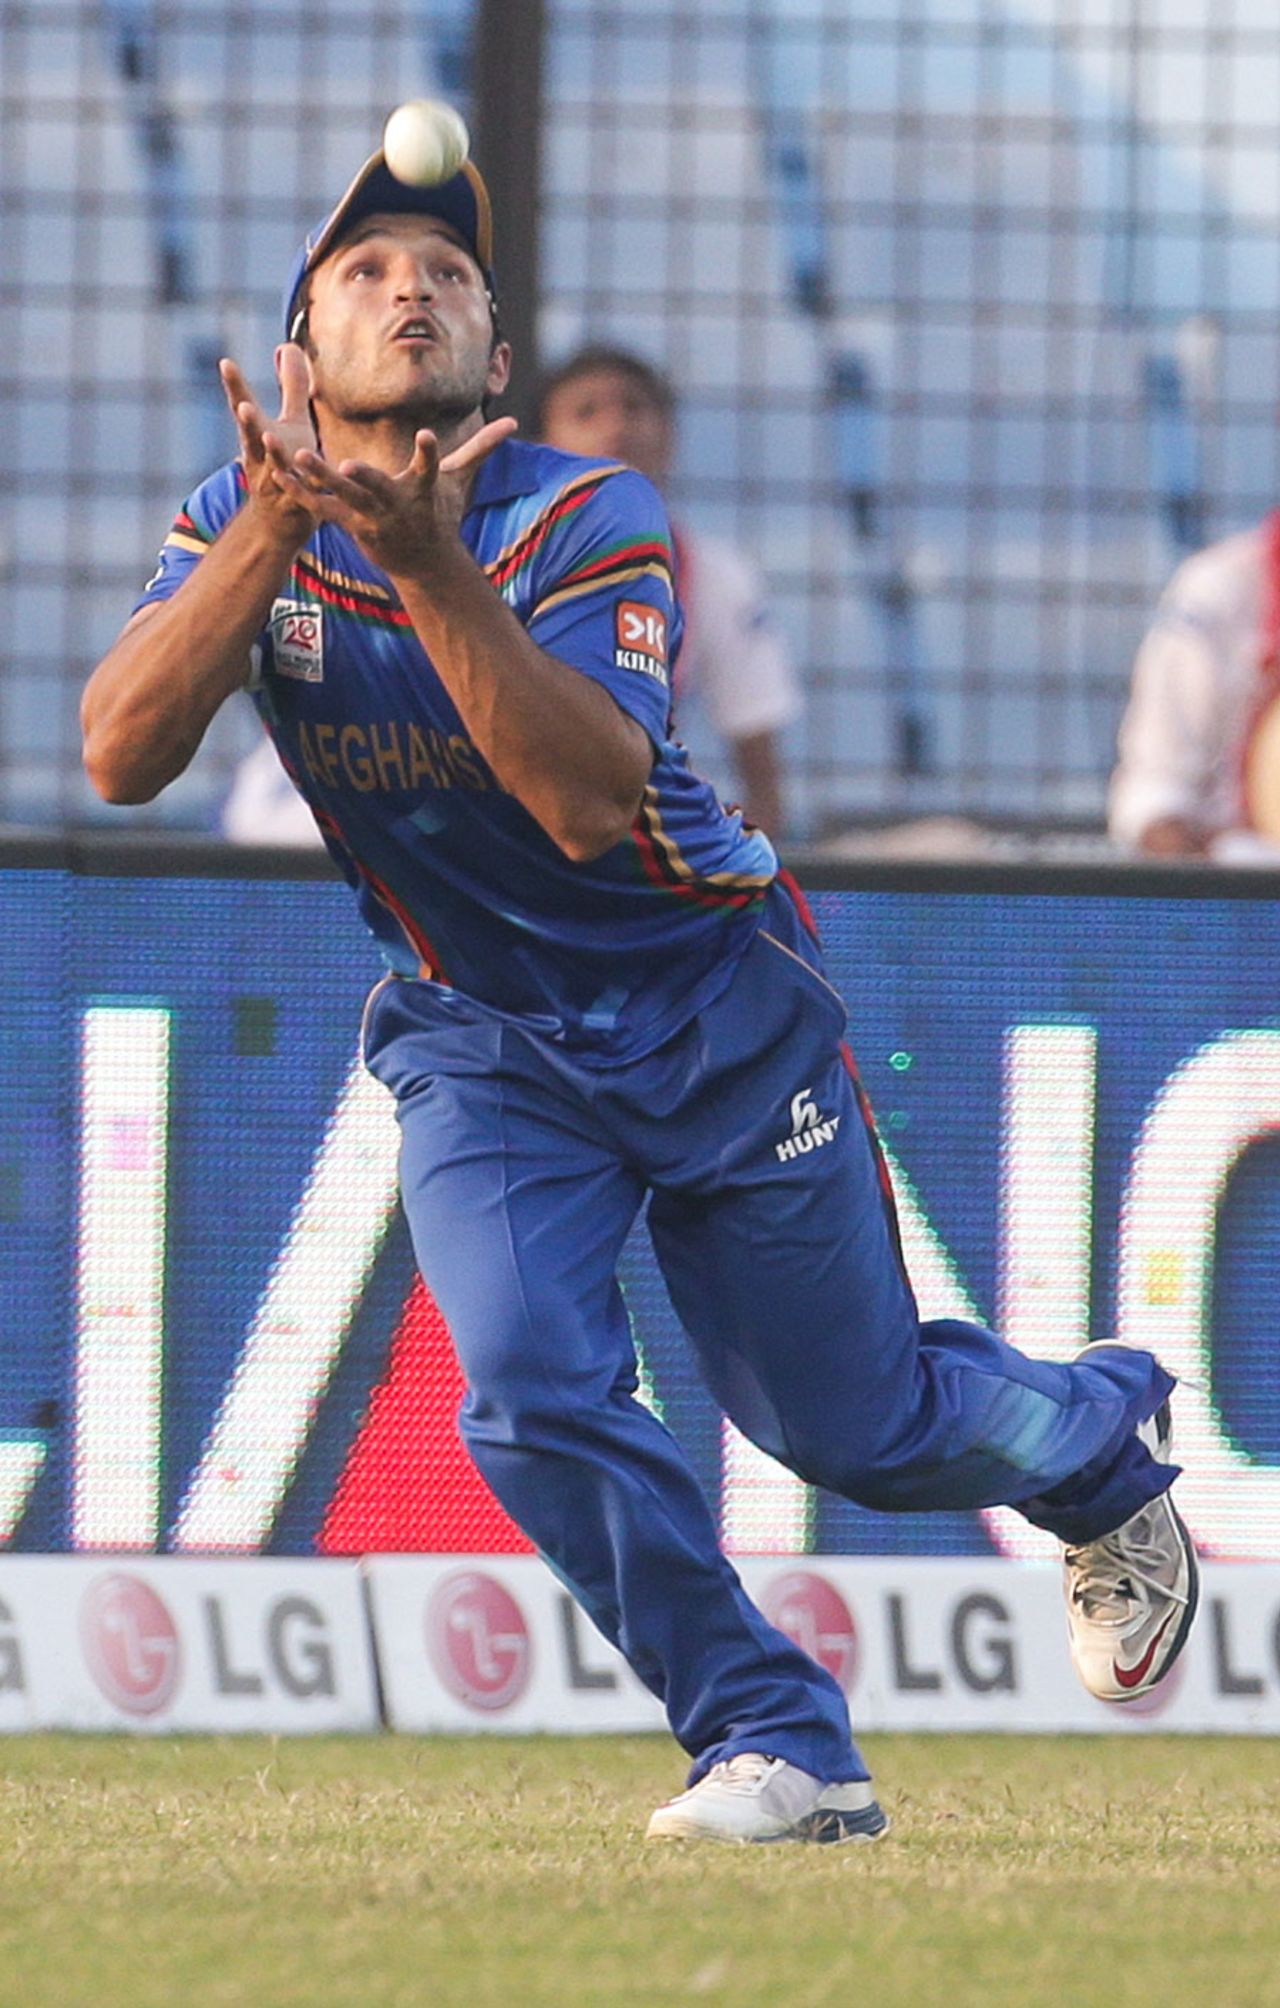 Gulbadin Naib gets under the ball in the outfield, Afghanistan v Hong Kong, World T20, Group A, Chittagong, March 18, 2014